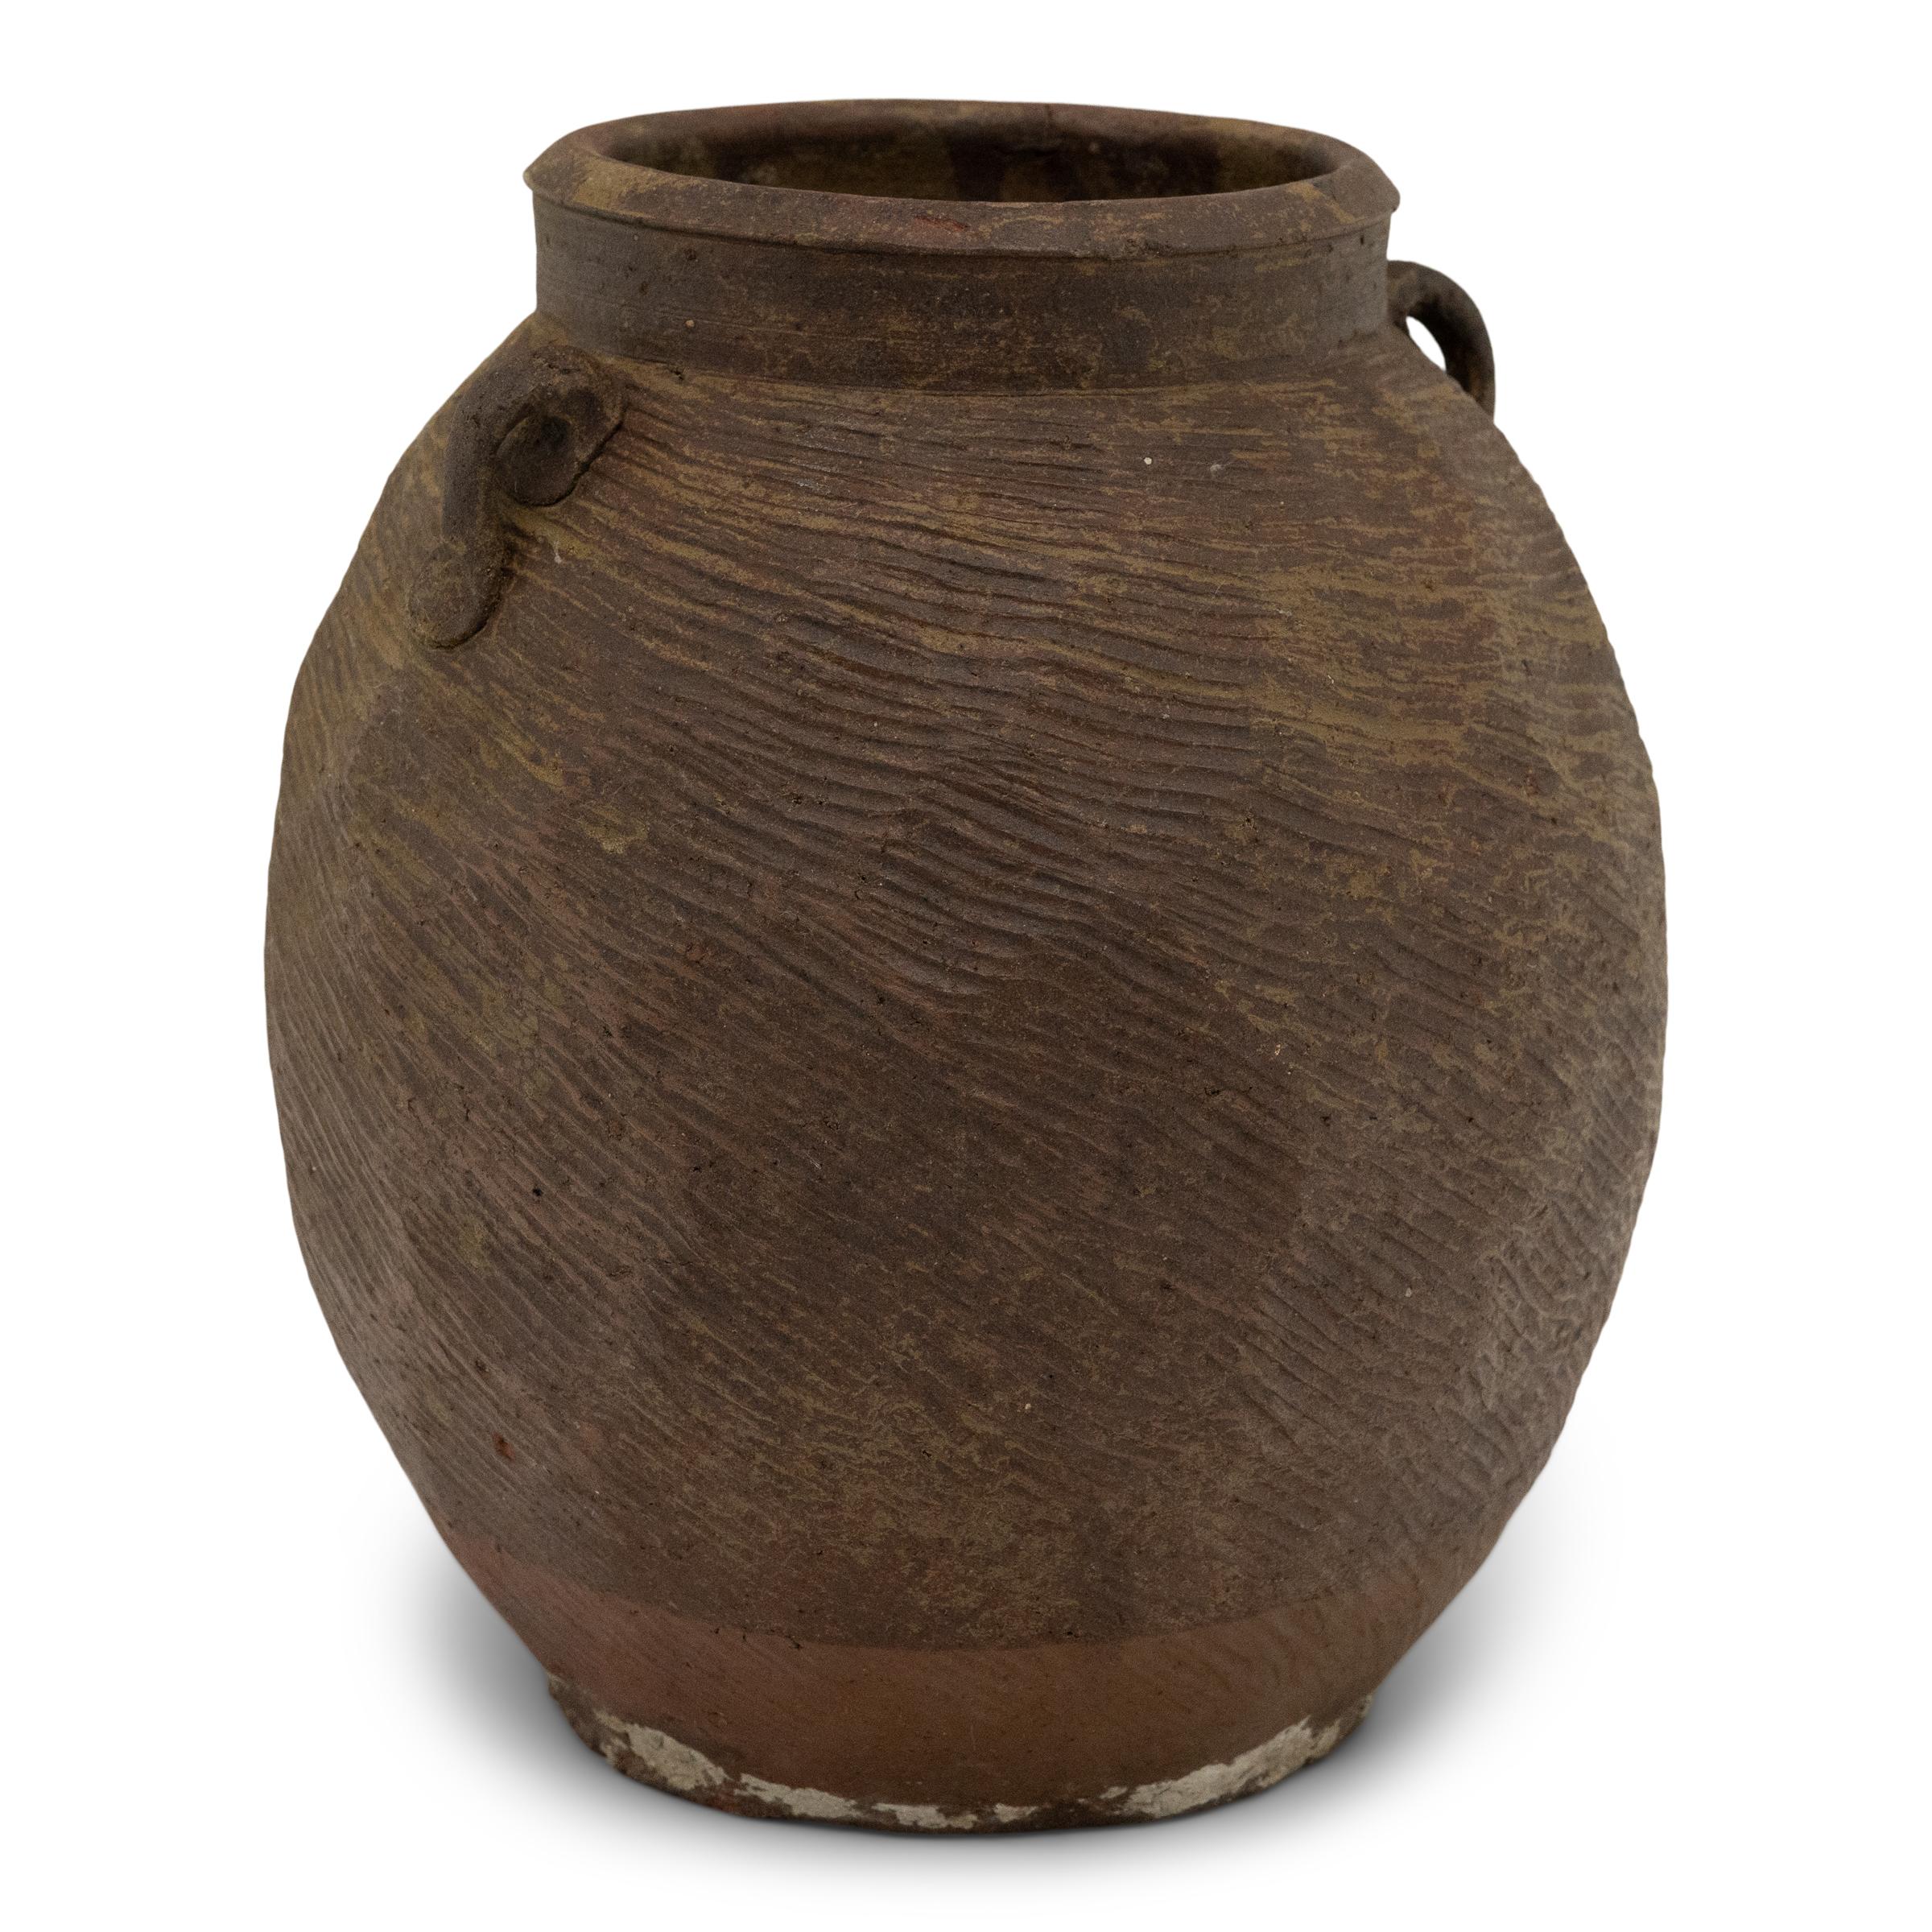 Charged with the humble task of storing dry goods, this small terracotta pot was hand-shaped in the 19th century with balanced proportions and a beautifully irregular brown-green slip finish. The lobed pot features a round form with a narrow base